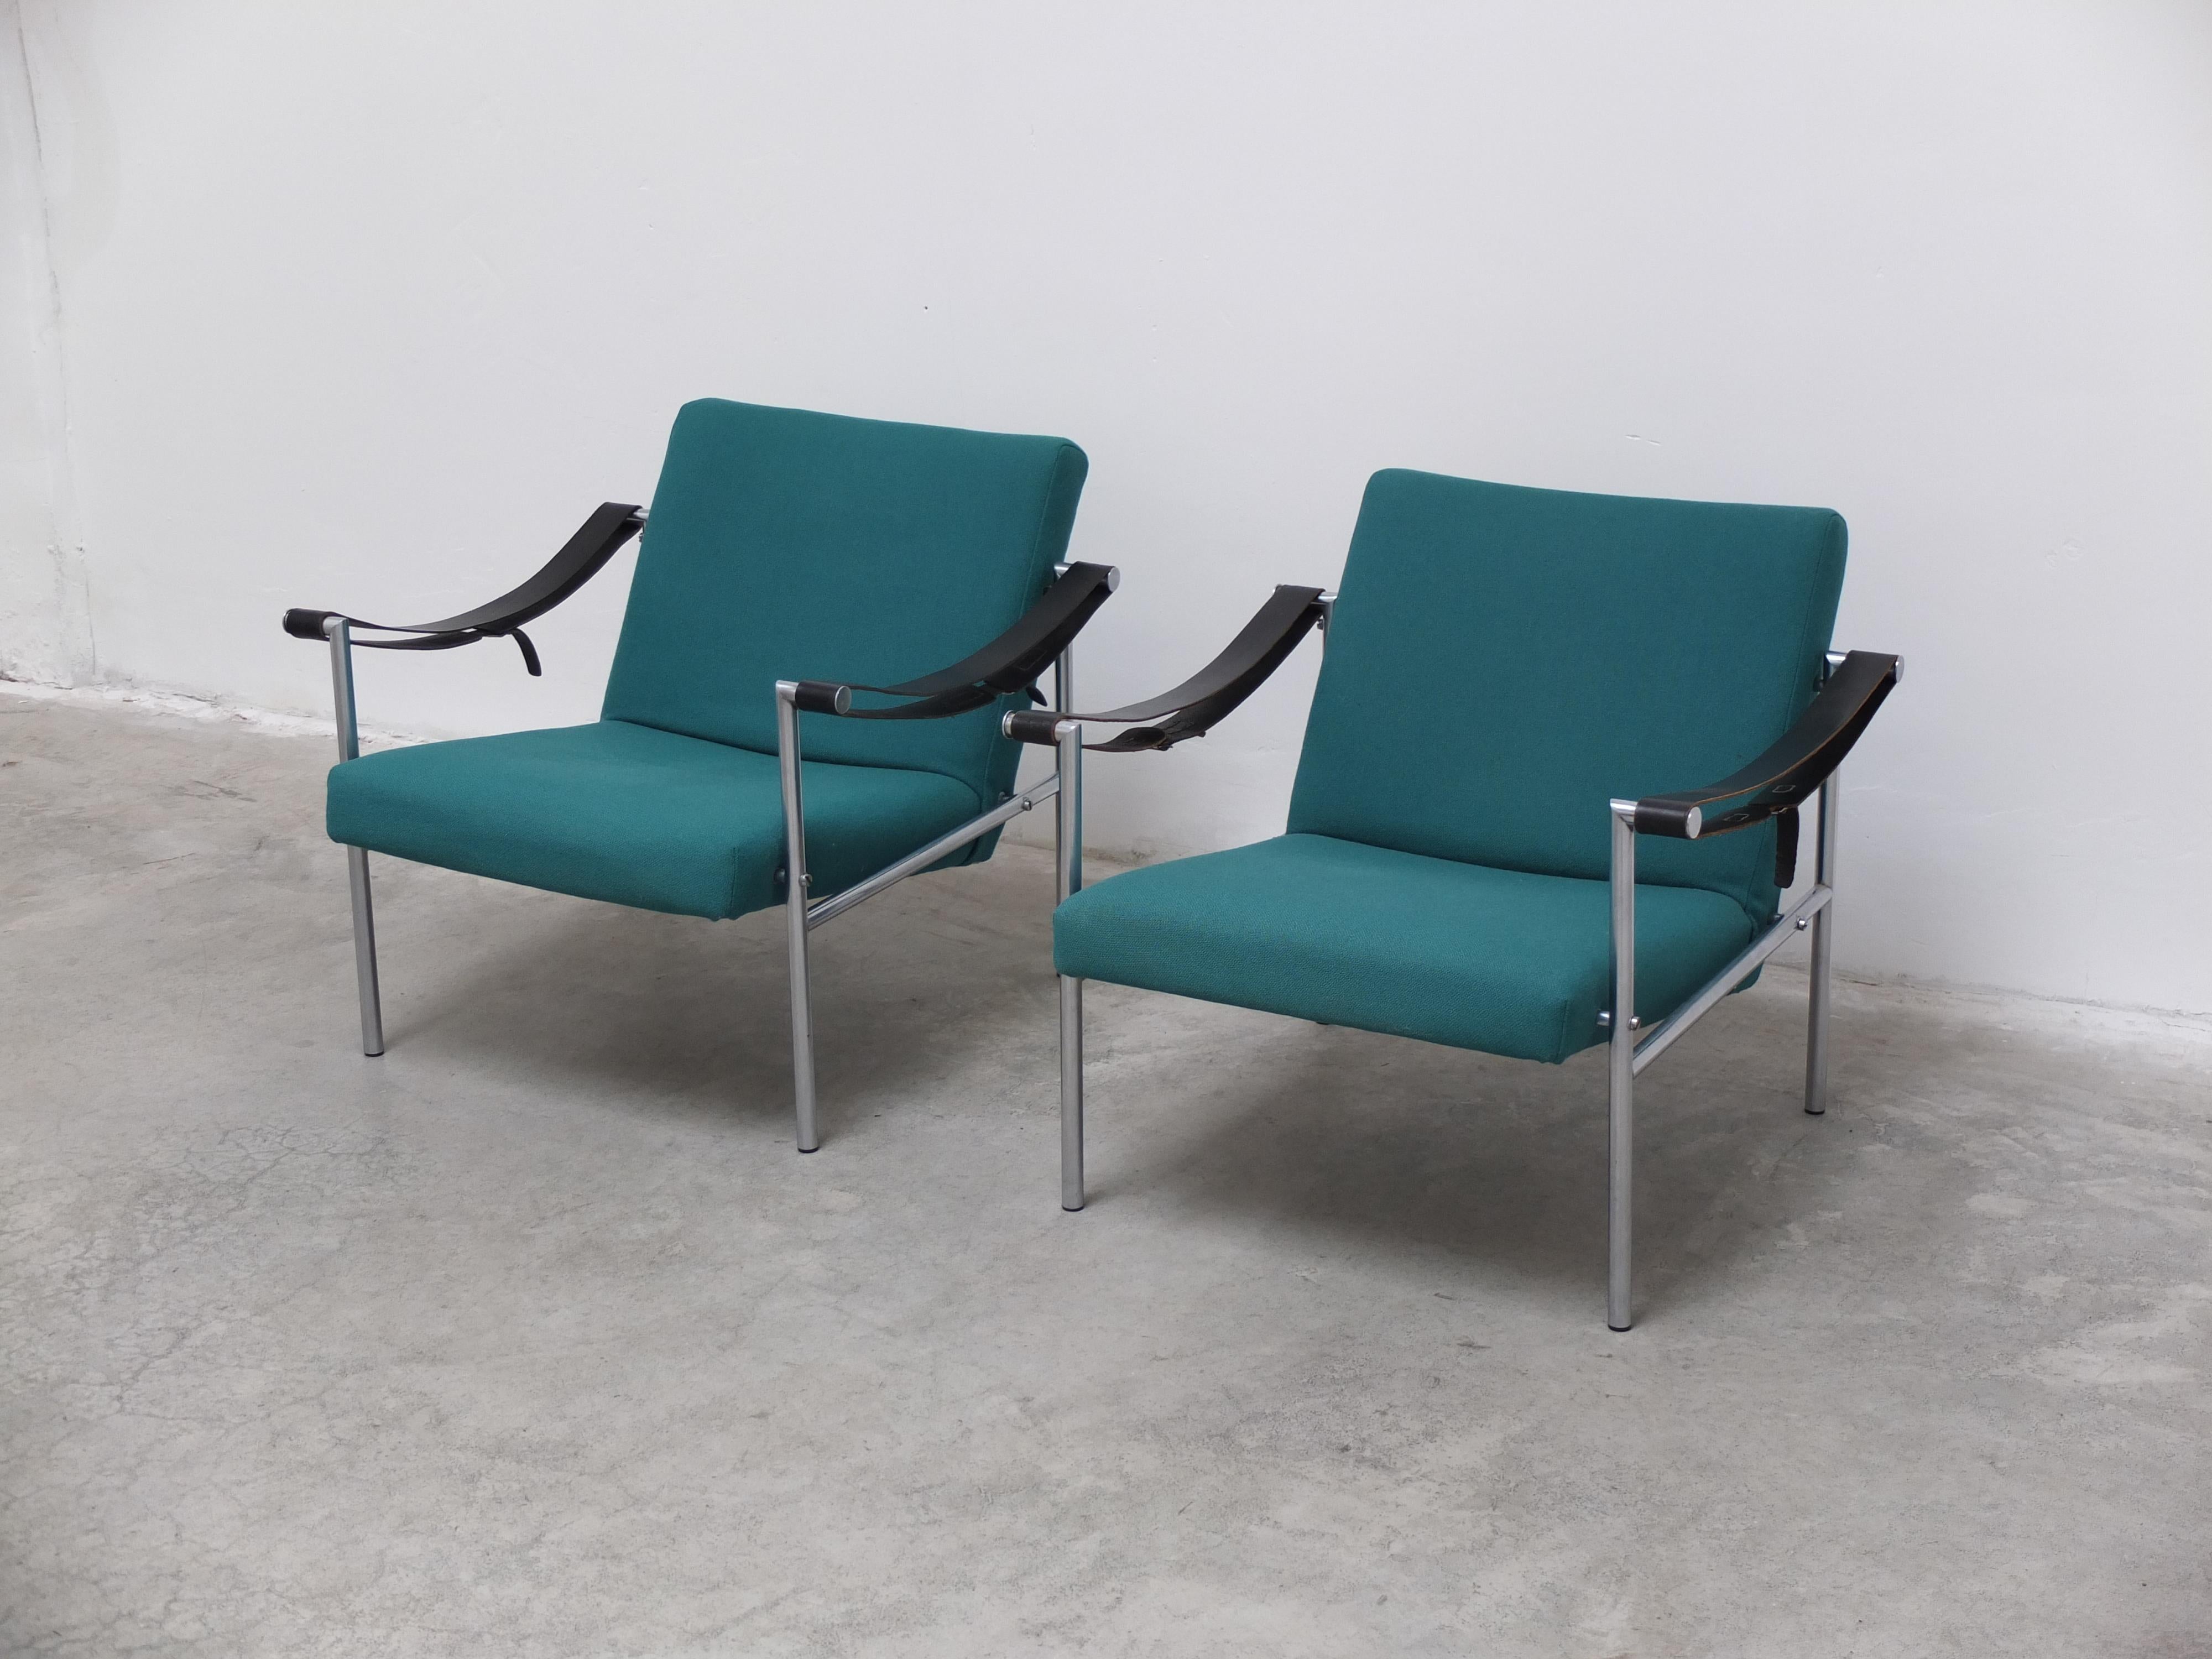 Pair of 'SZ08' Lounge Chairs by Martin Visser for 't Spectrum, 1960 In Good Condition For Sale In Antwerpen, VAN